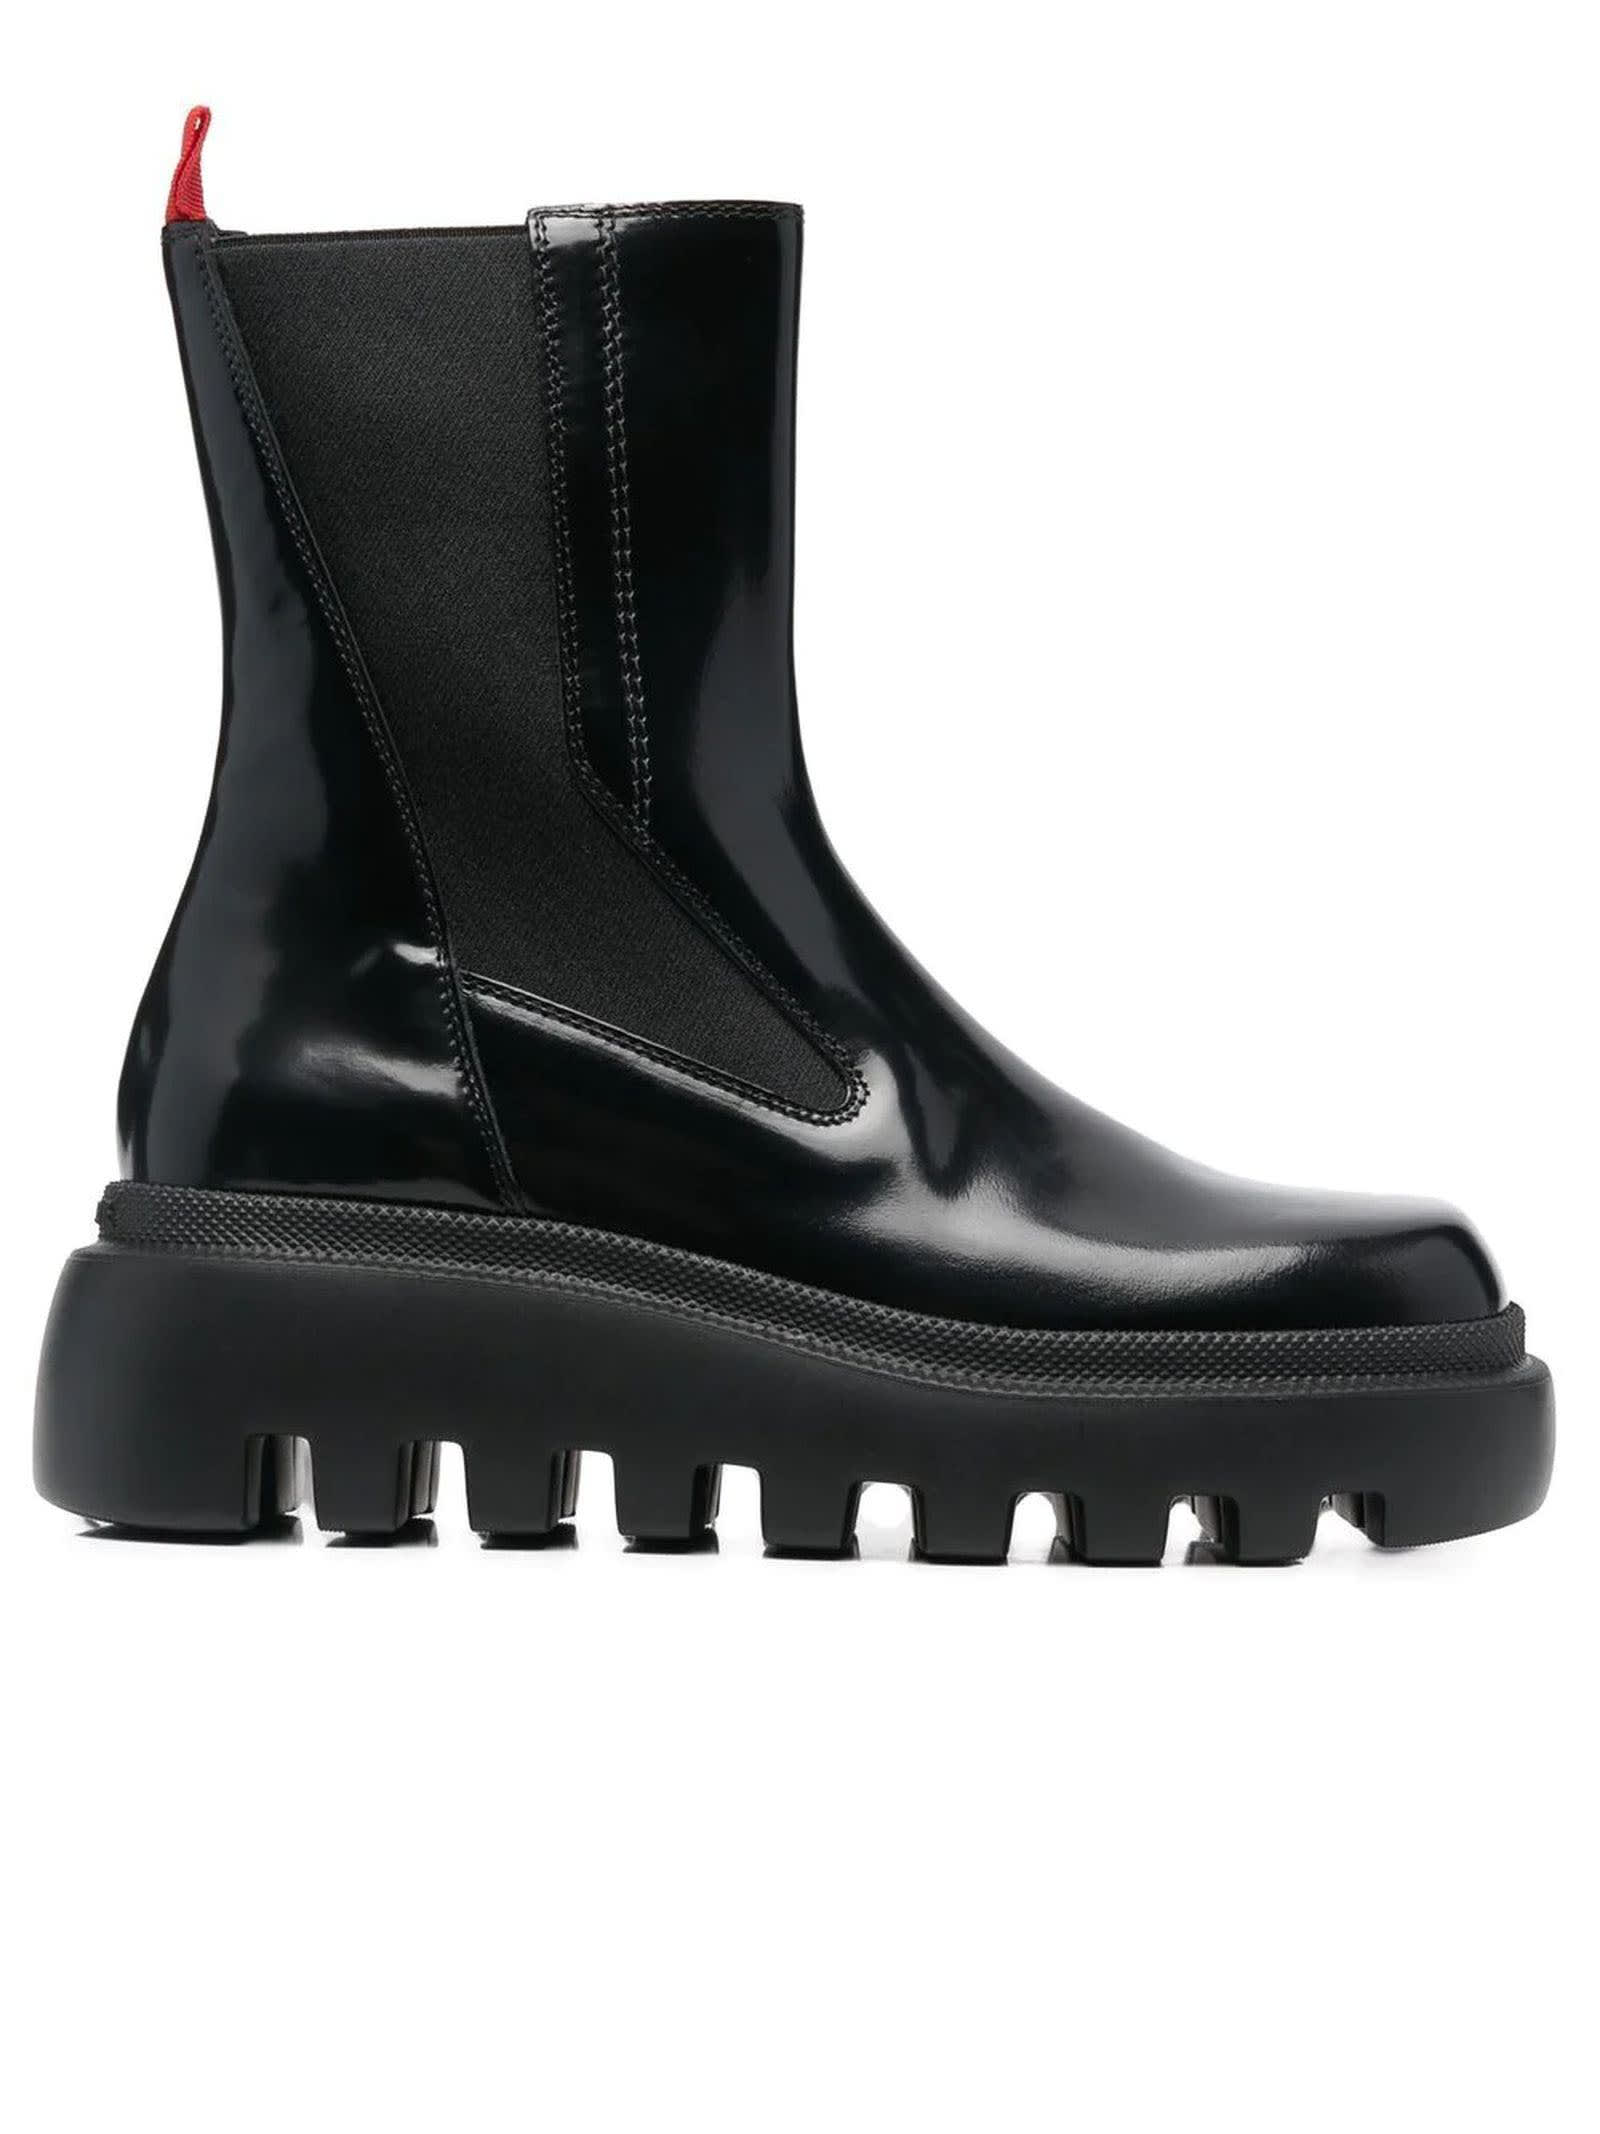 Vic Matié Gear Black Beatle Boots In Glossy